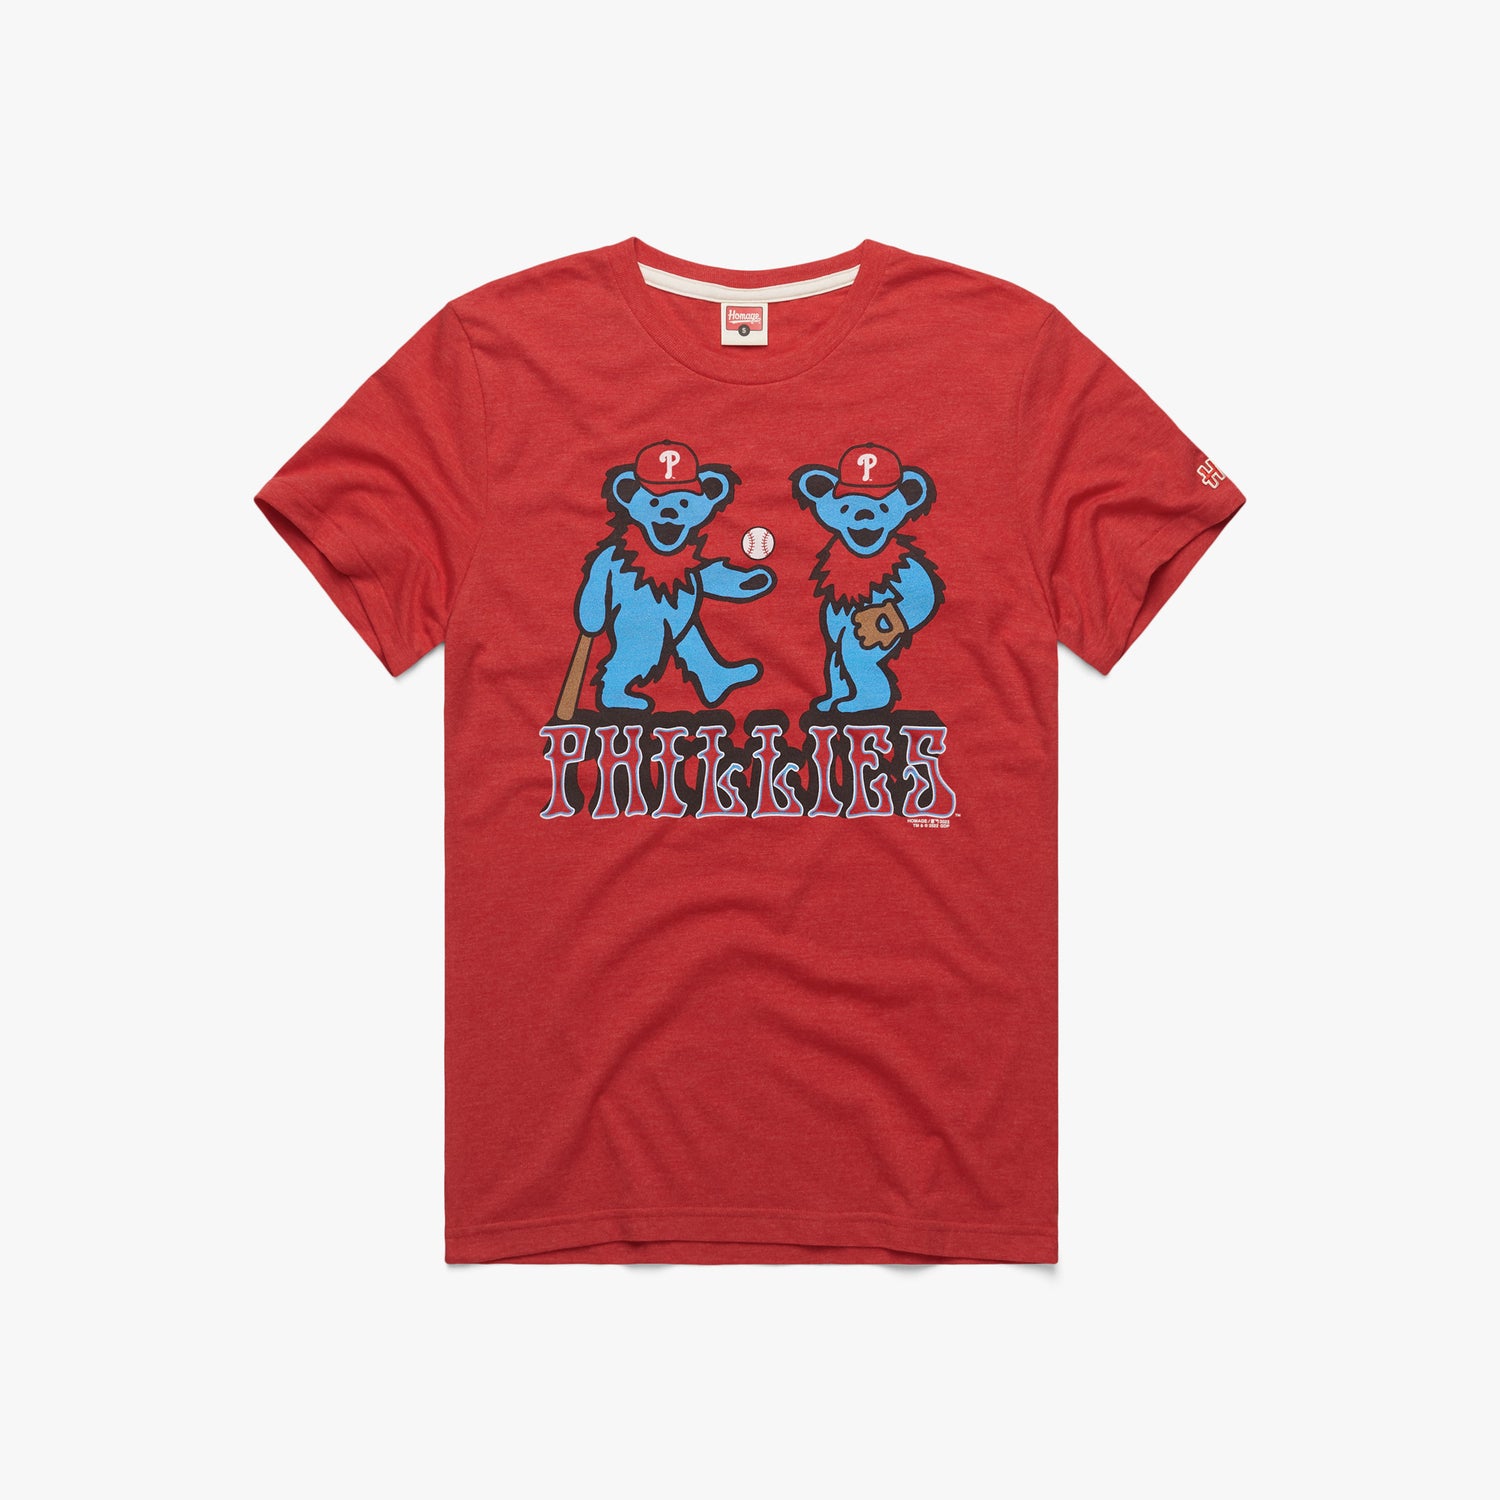 Philadelphia Phillies Steal Your Base Red Athletic T-Shirt - S